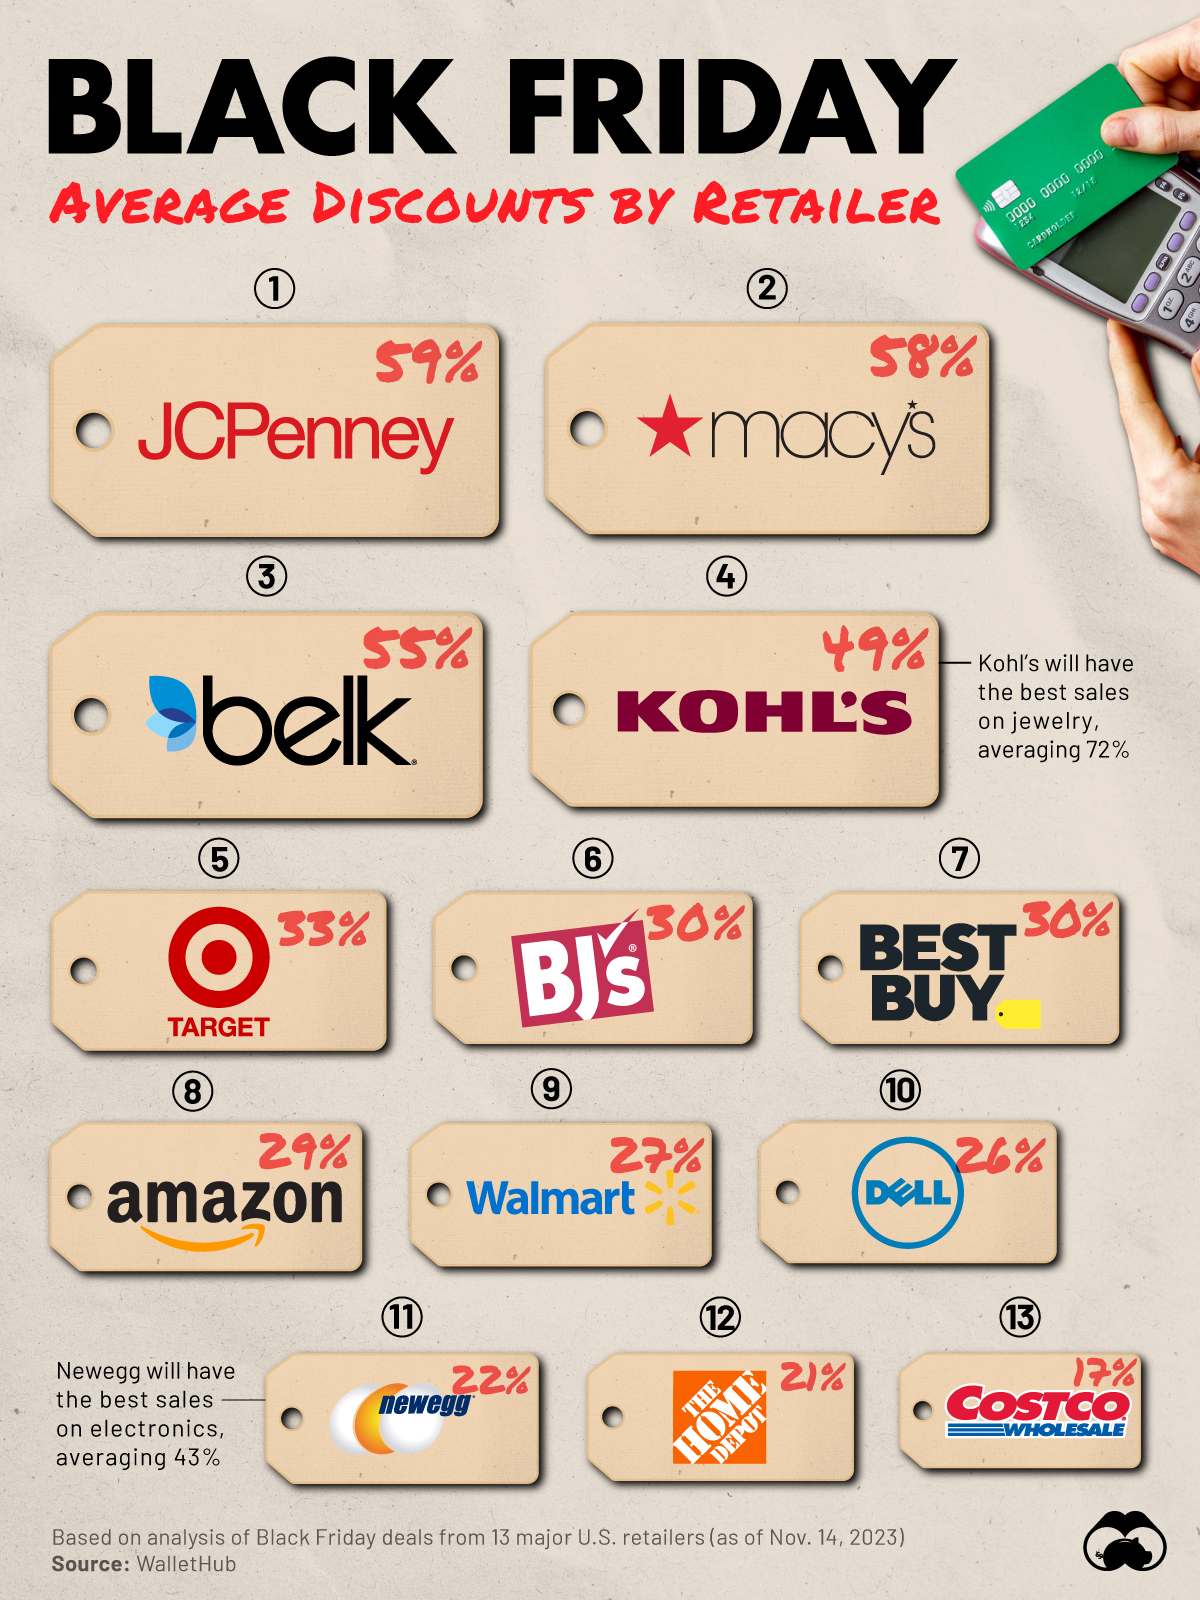 A chart ranking the average Black Friday discounts of retailers by the size of the label.